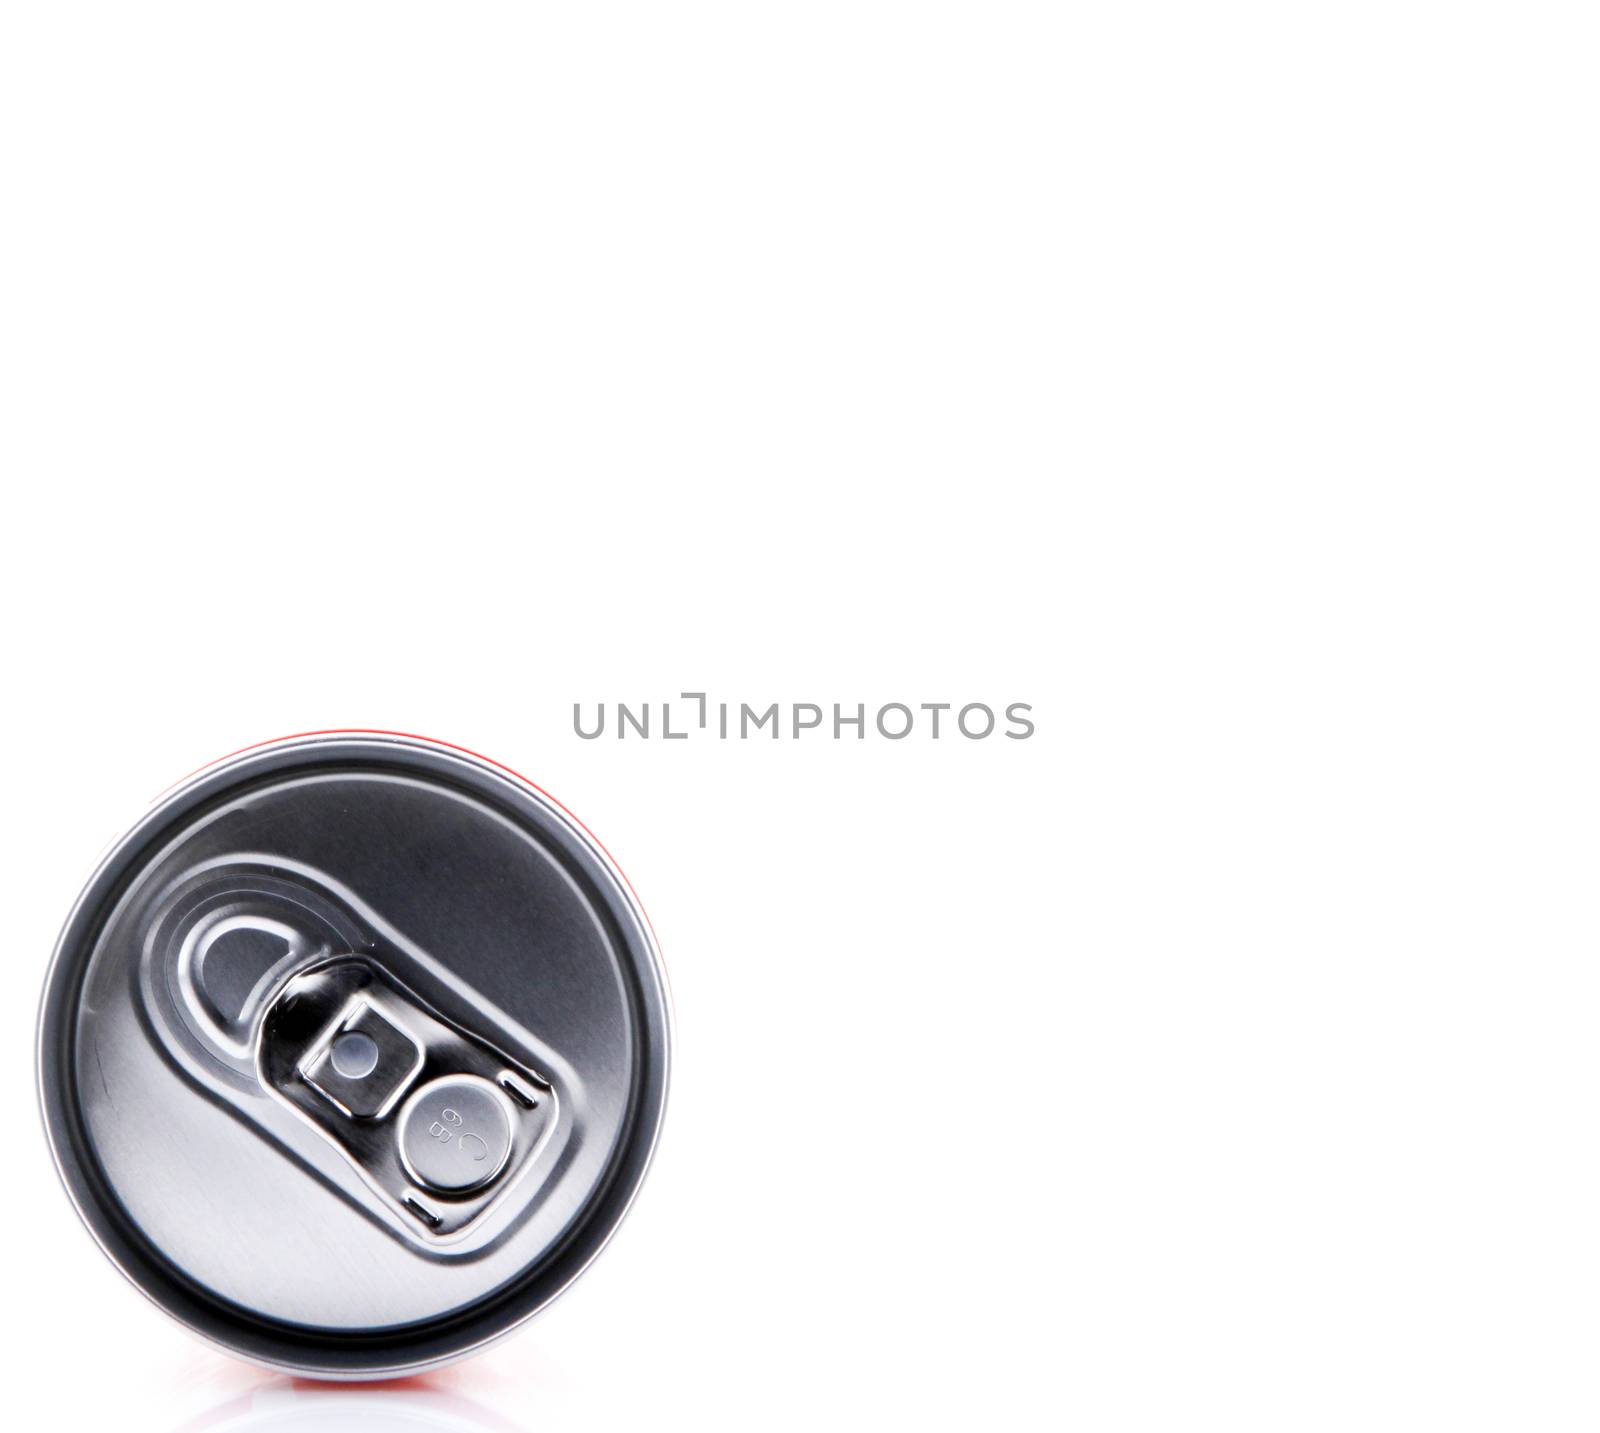 AYTOS, BULGARIA - JANUARY 25, 2014: Red Bull can isolated on white background. Red Bull is an energy drink sold by Austrian company Red Bull GmbH, created in 1987. by nenovbrothers